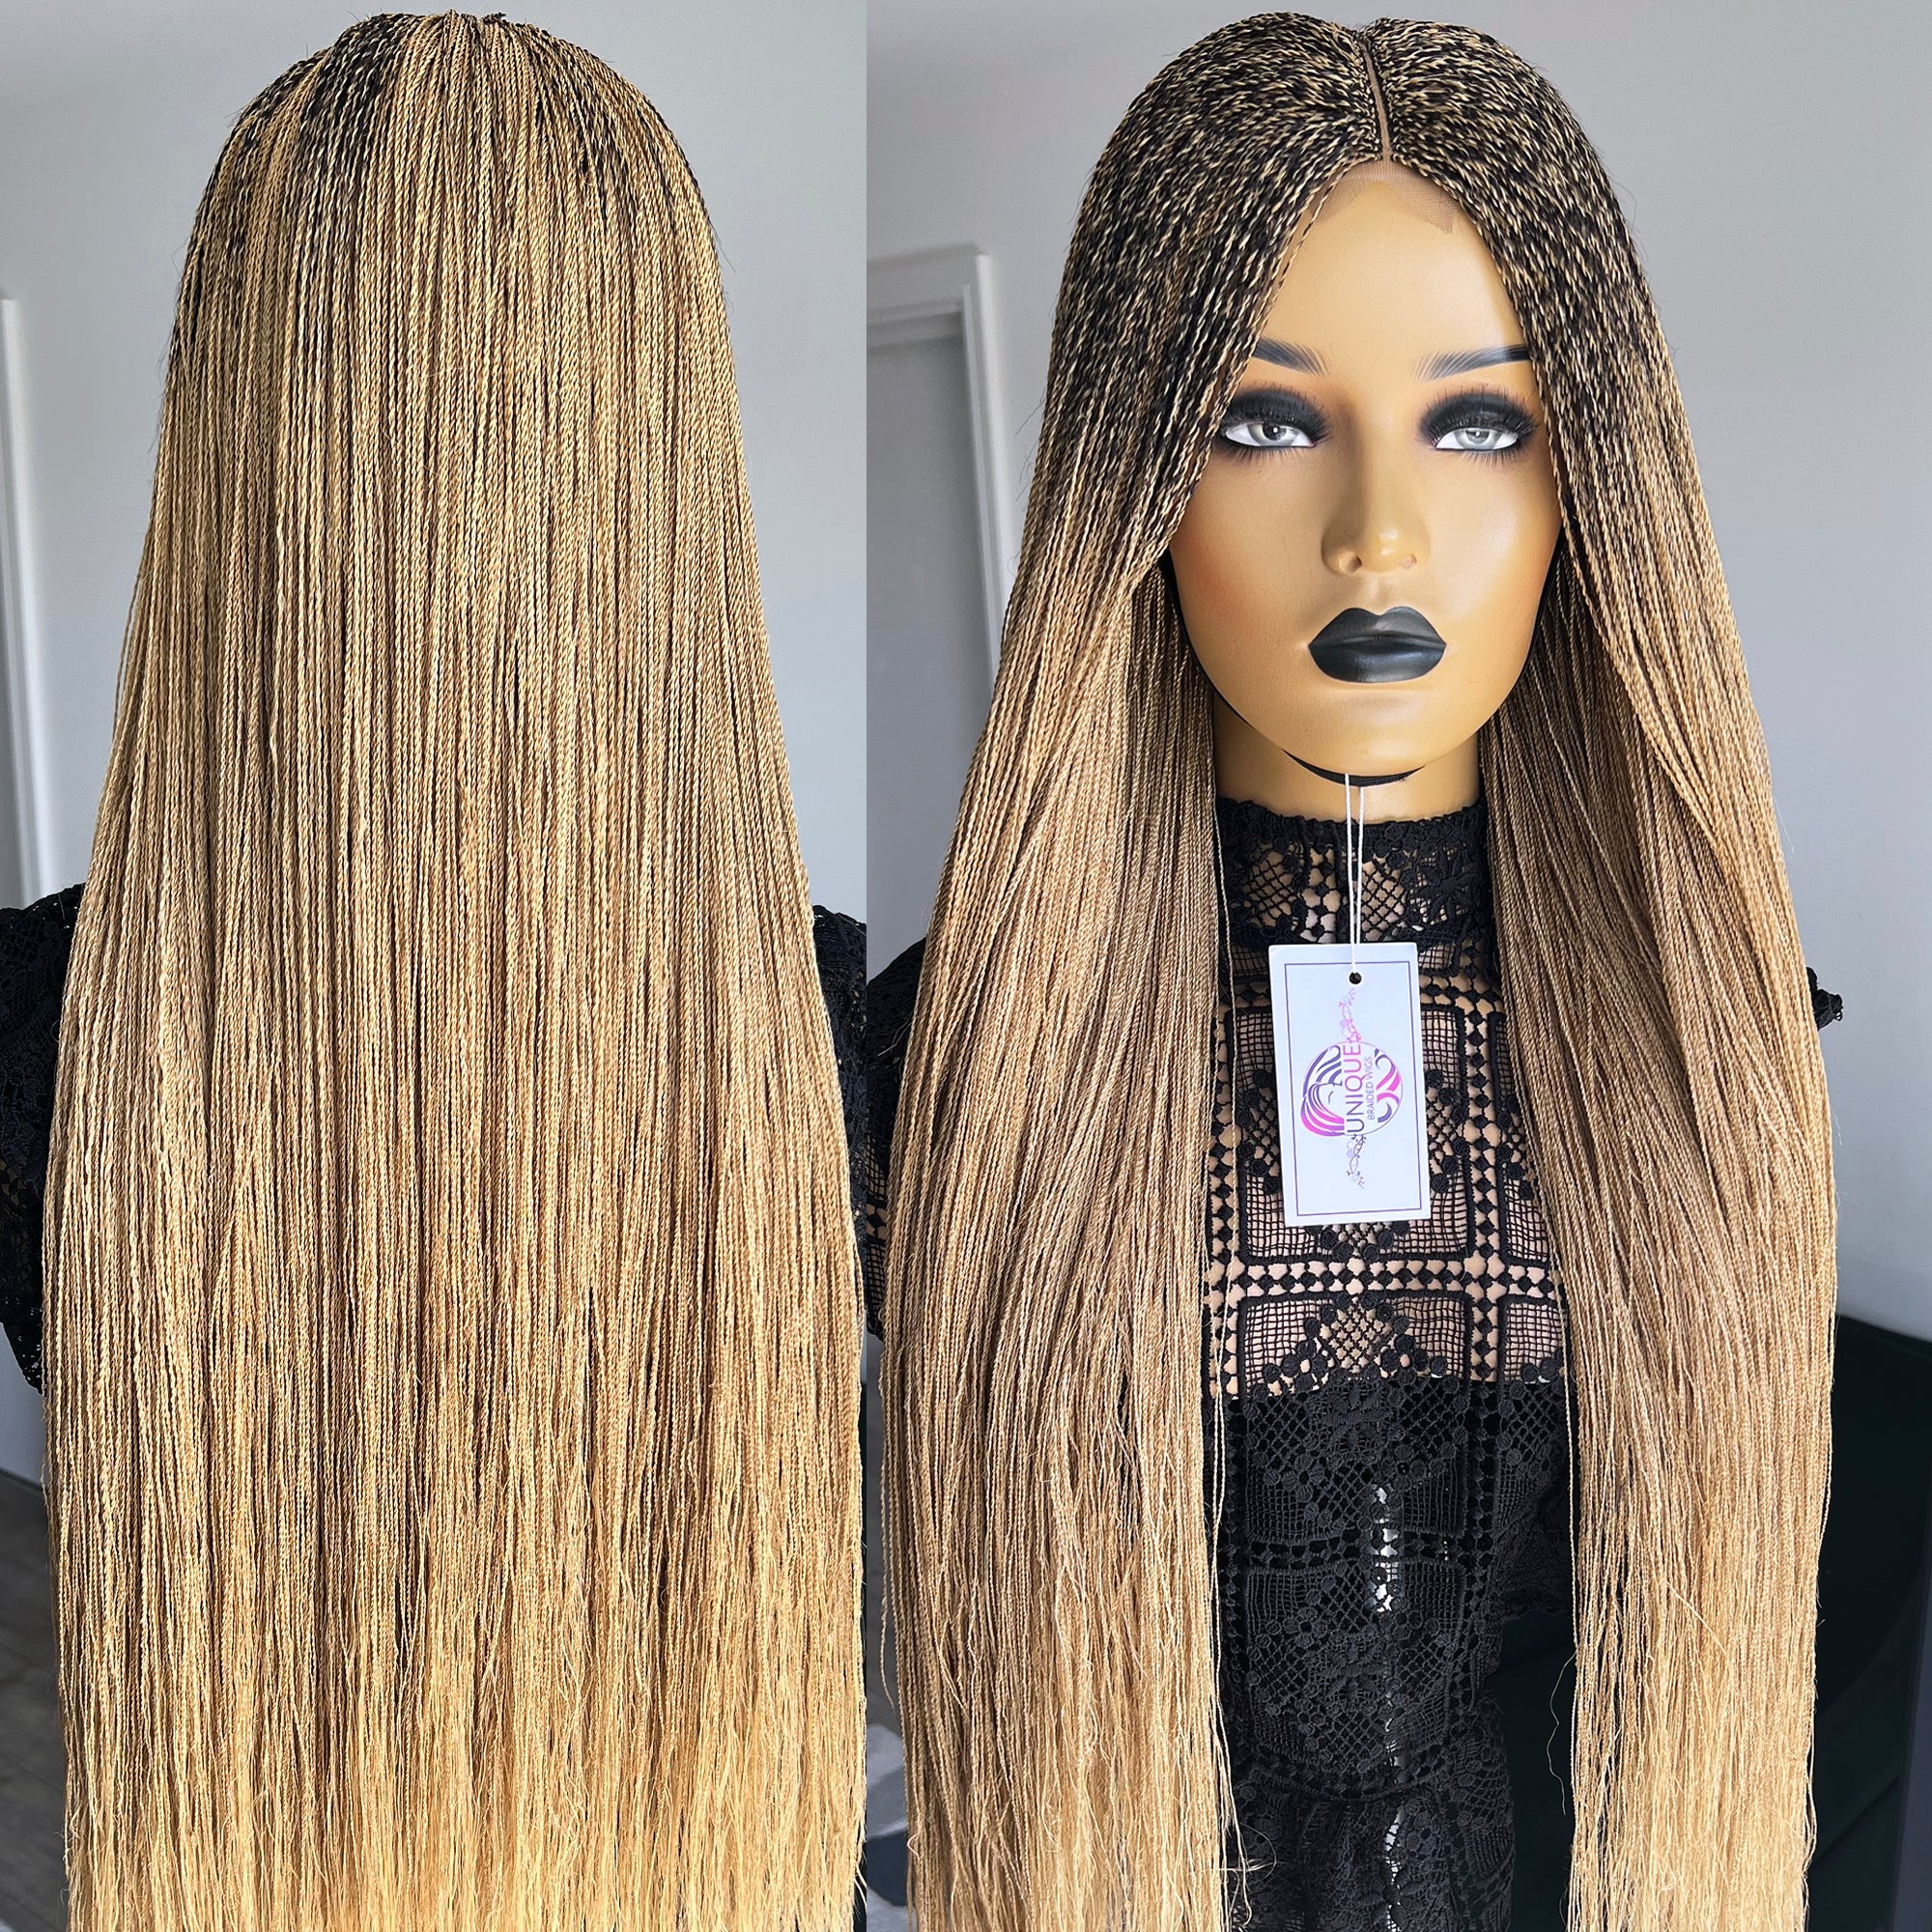 Senegalese Needle Twists Wig - Donna